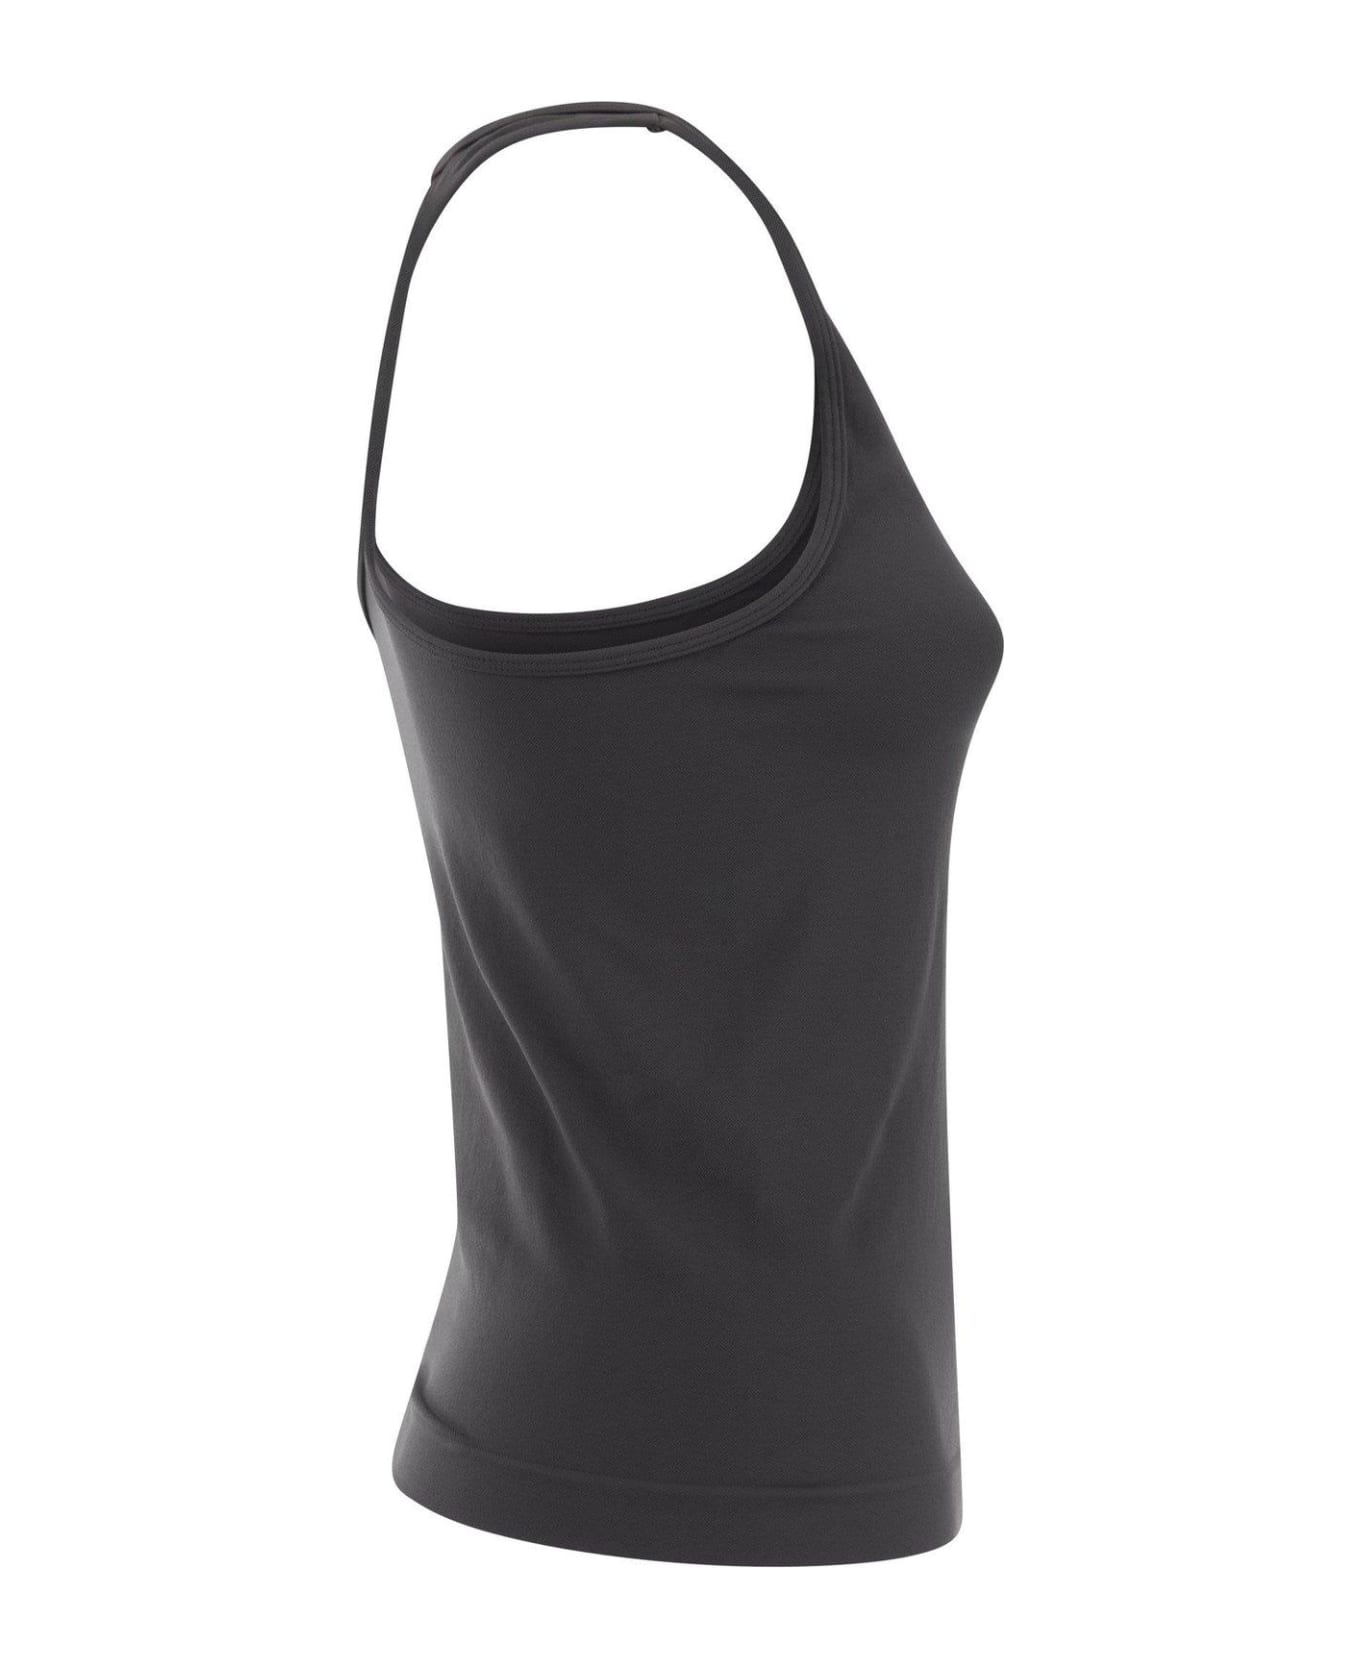 'S Max Mara Logo Detailed Stretched Tank Top